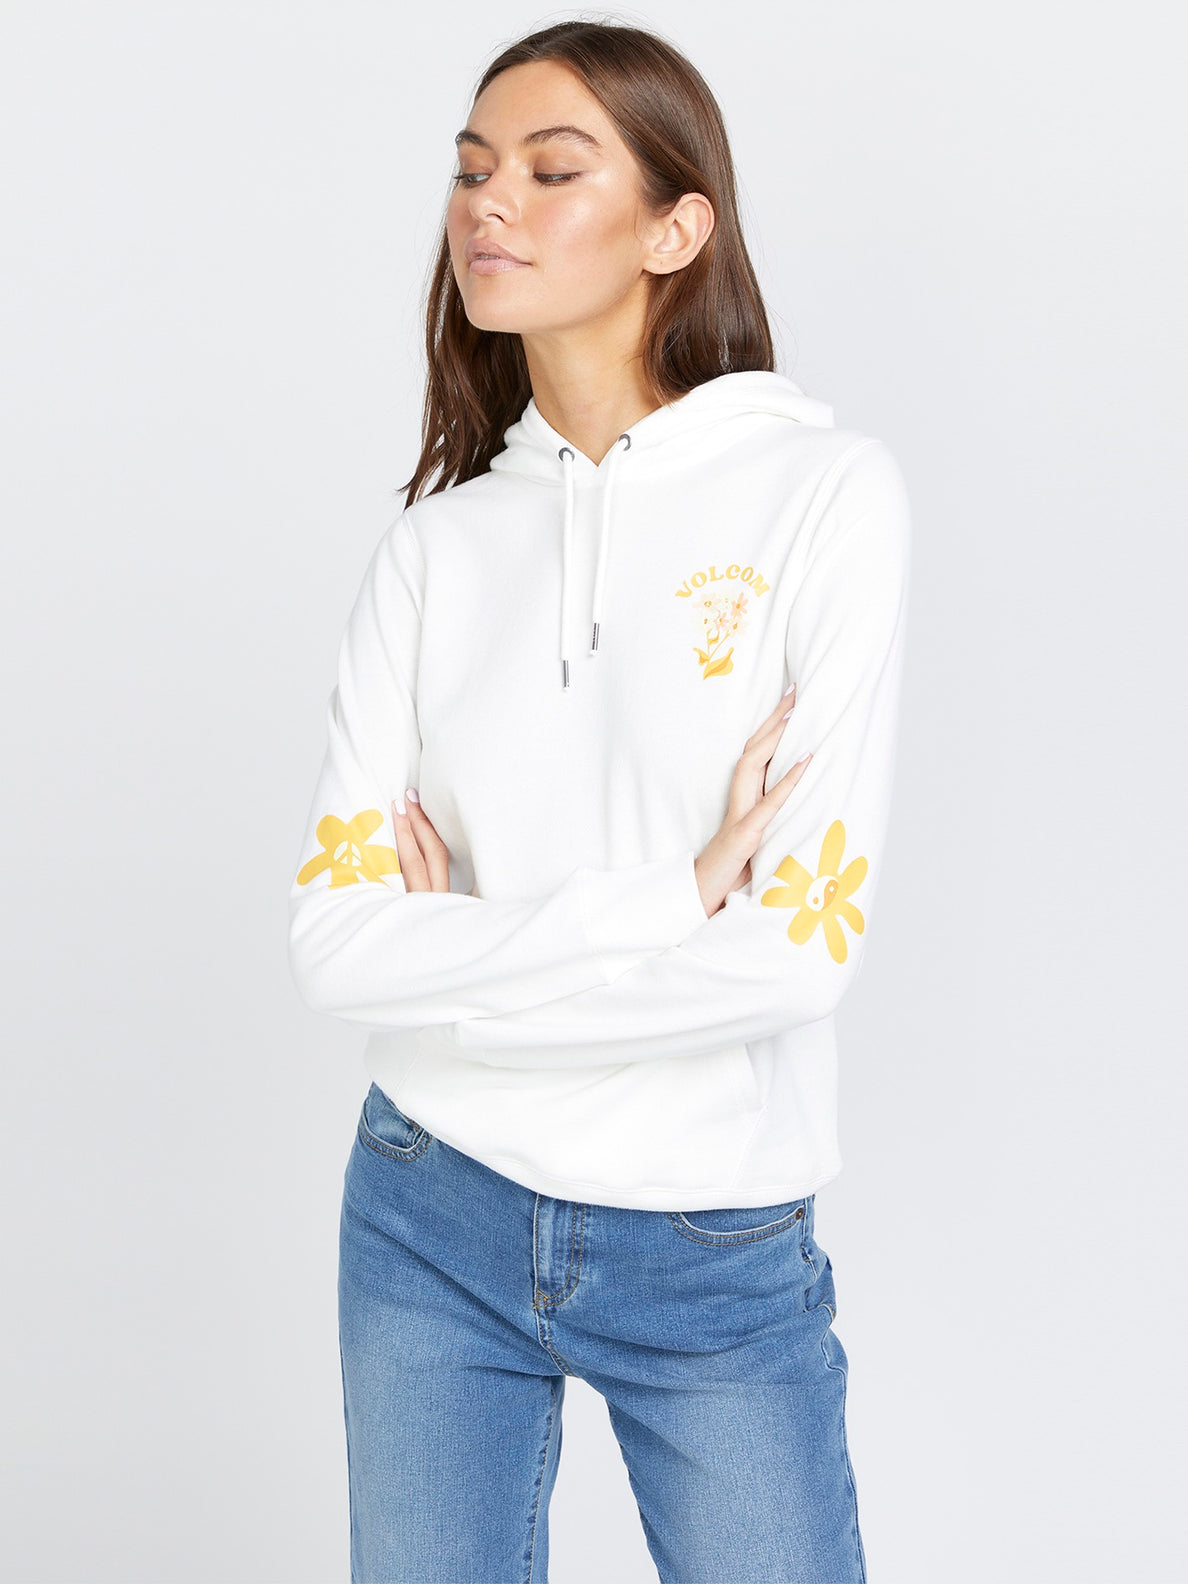 Truly Deal Hoodie - Star White